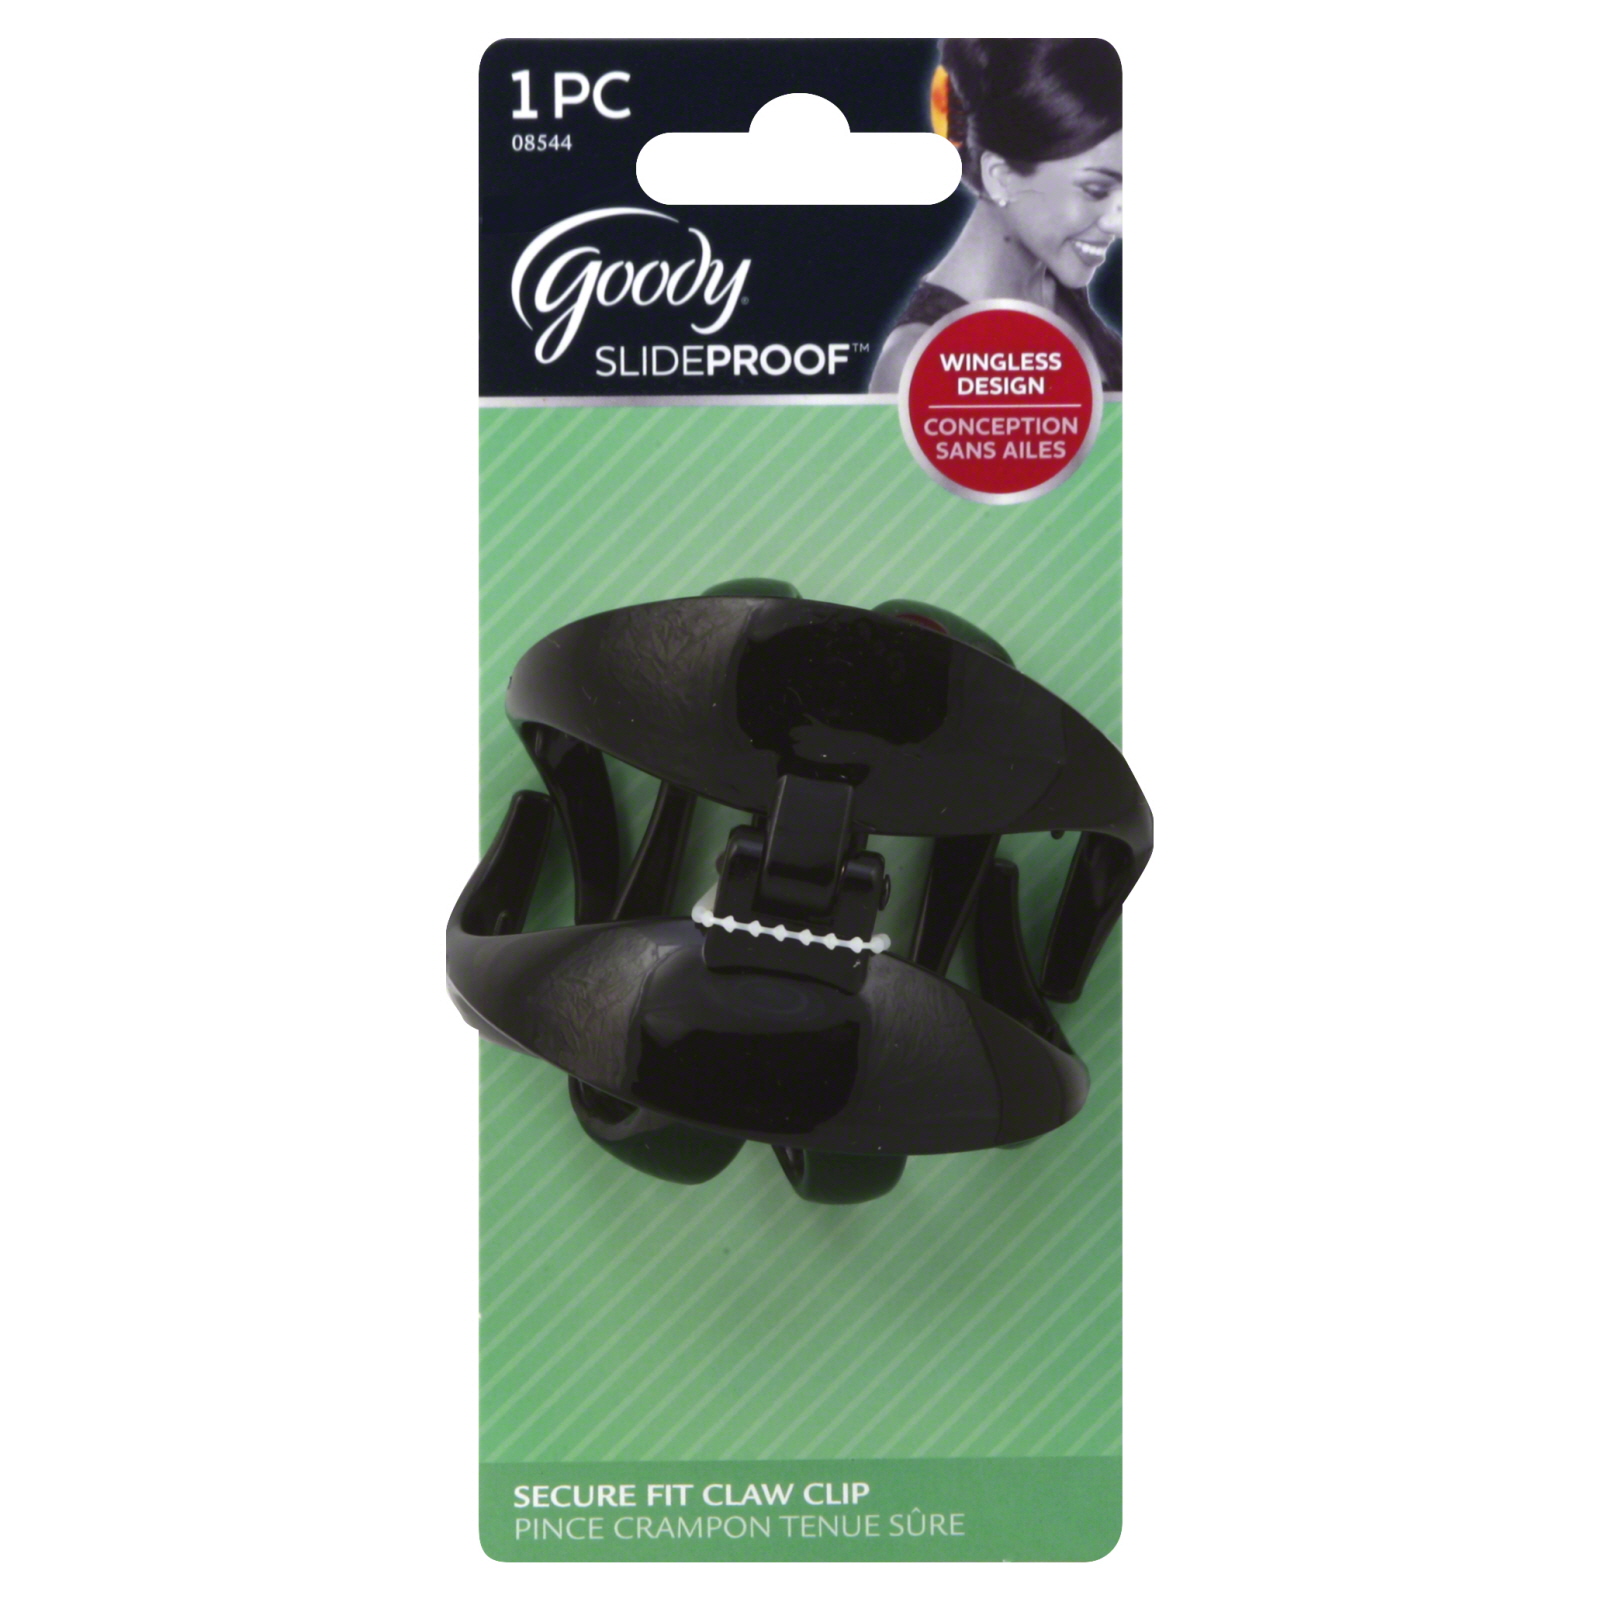 Goody SlideProof Wingless Large Claw Clip, 1 CT - Click Image to Close